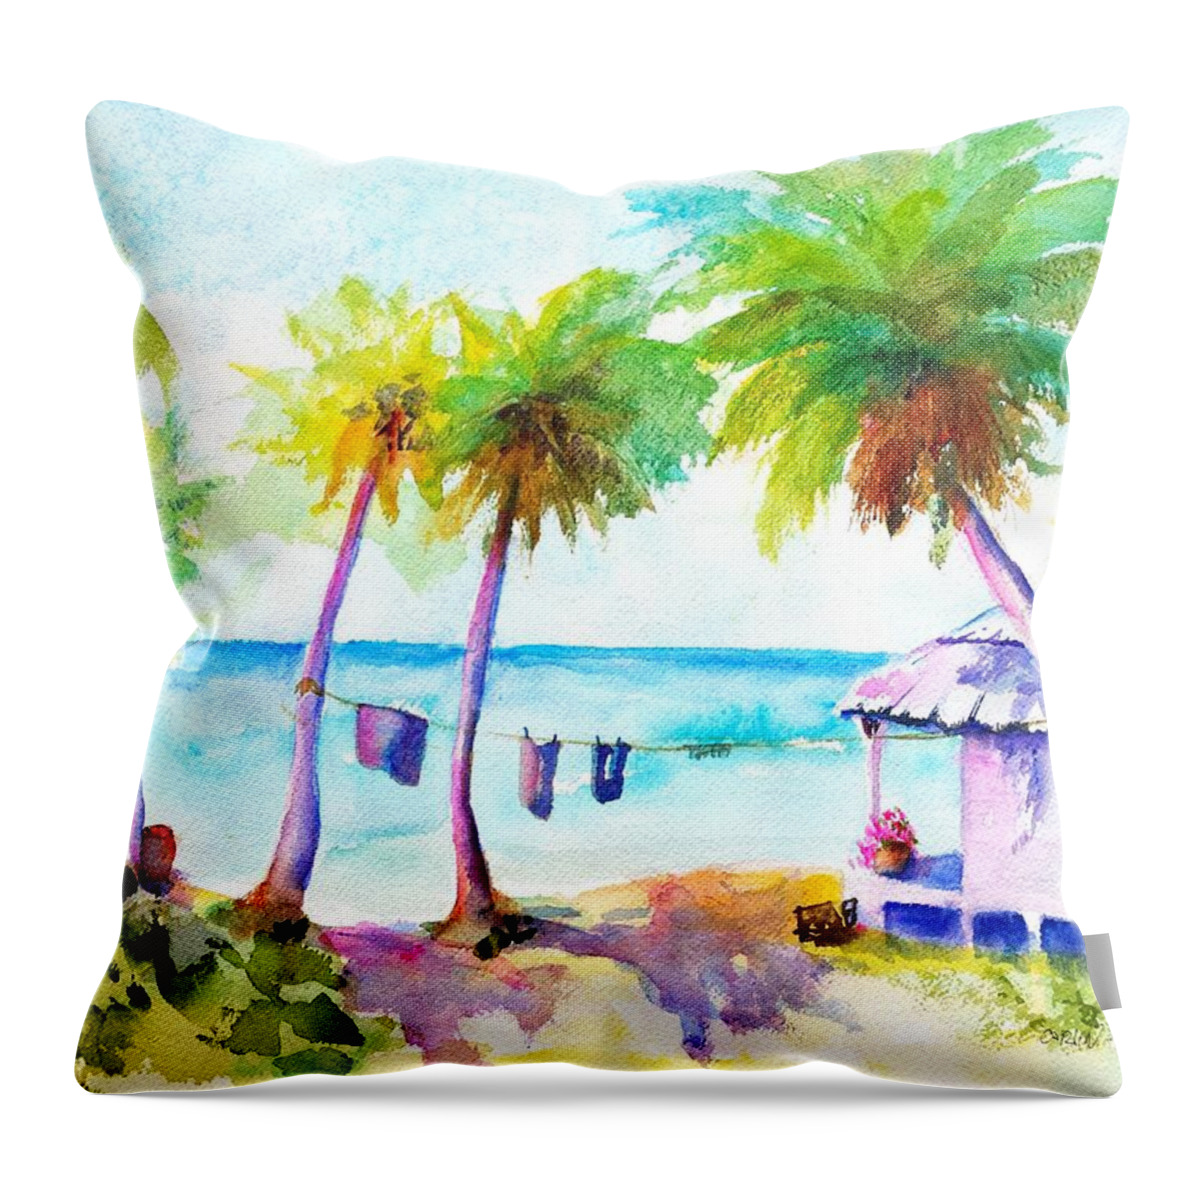 Troical Throw Pillow featuring the painting Beach House Tropical Paradise by Carlin Blahnik CarlinArtWatercolor